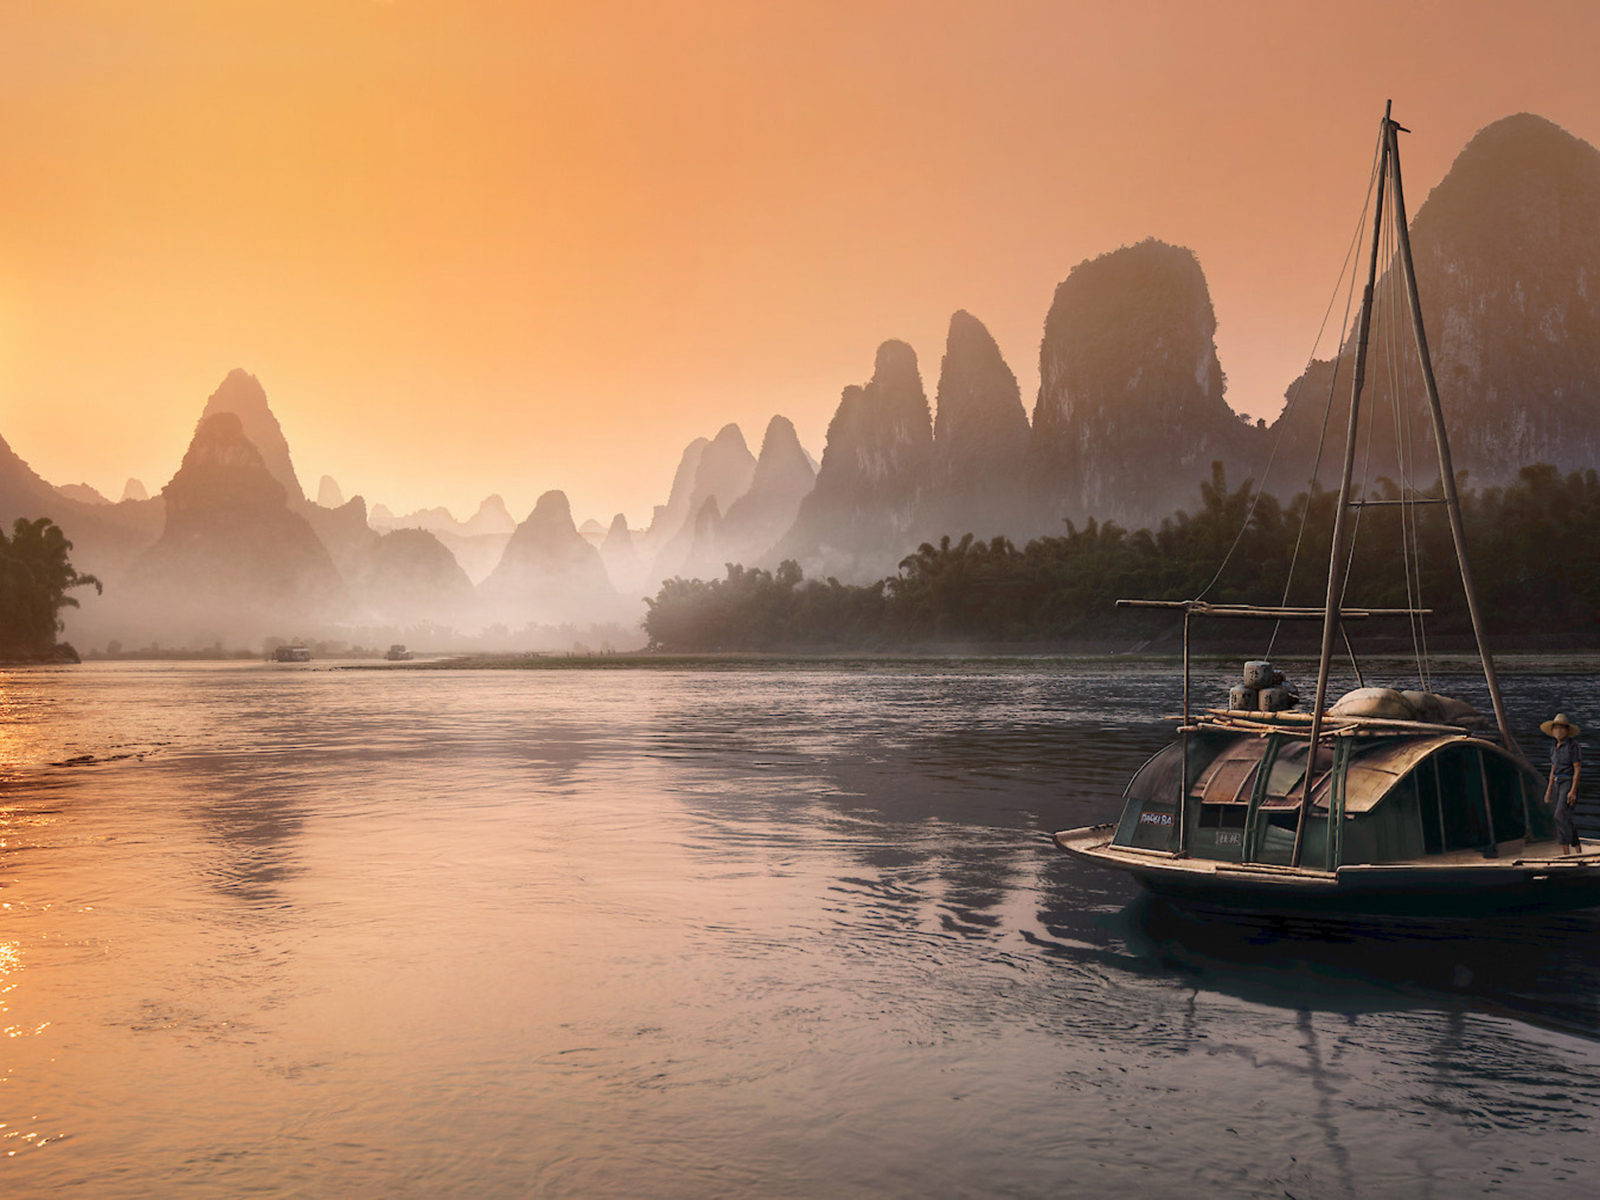 Lijiang River In The South Of The Village Xingping Near The Guilin In China Desktop HD Wallpaper For Pc Tablet And Mobile 3840x2160, Wallpaper13.com